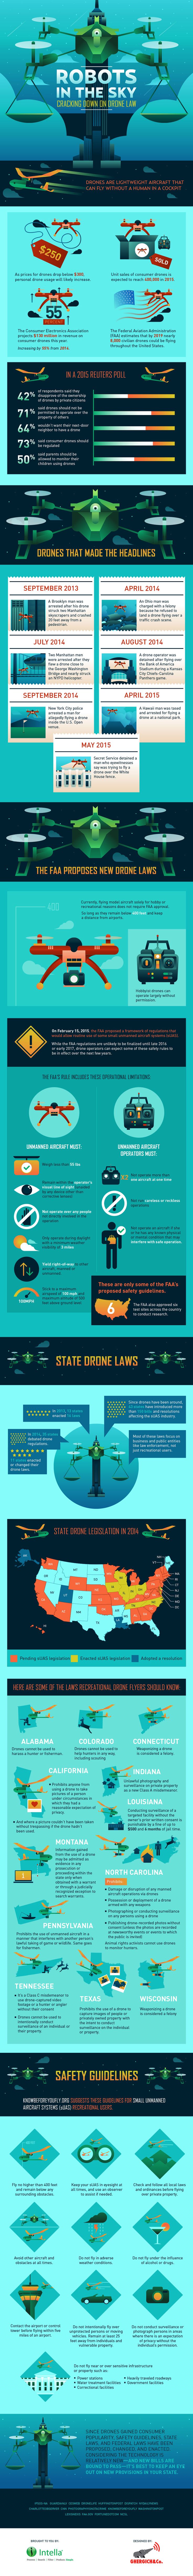 This Infographic Explains Current Recreational Drone Laws and Safety